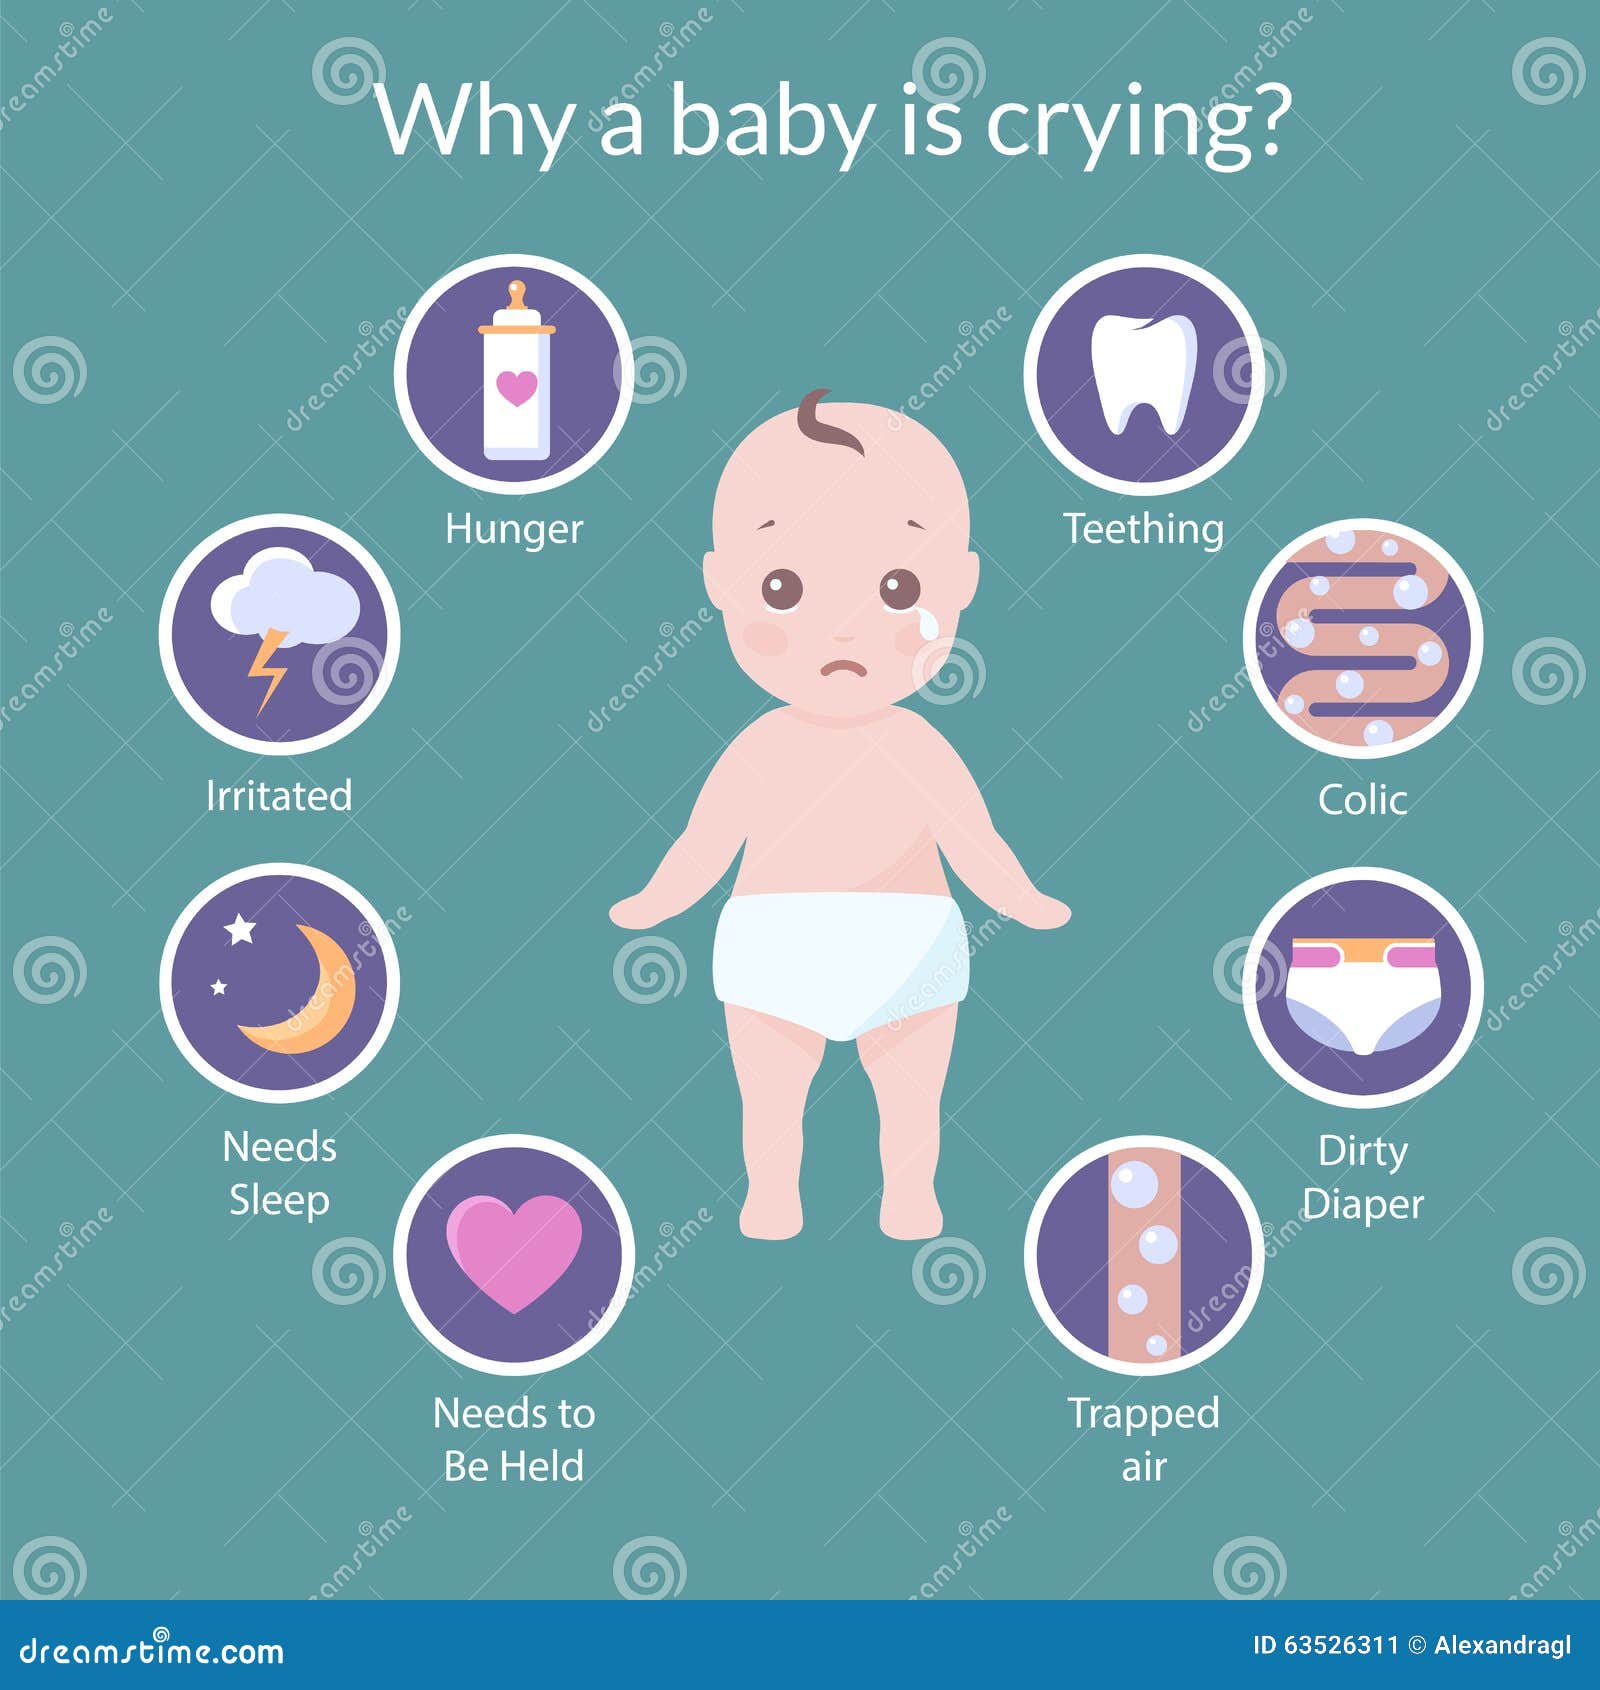 crying icons stock vector. Illustration 